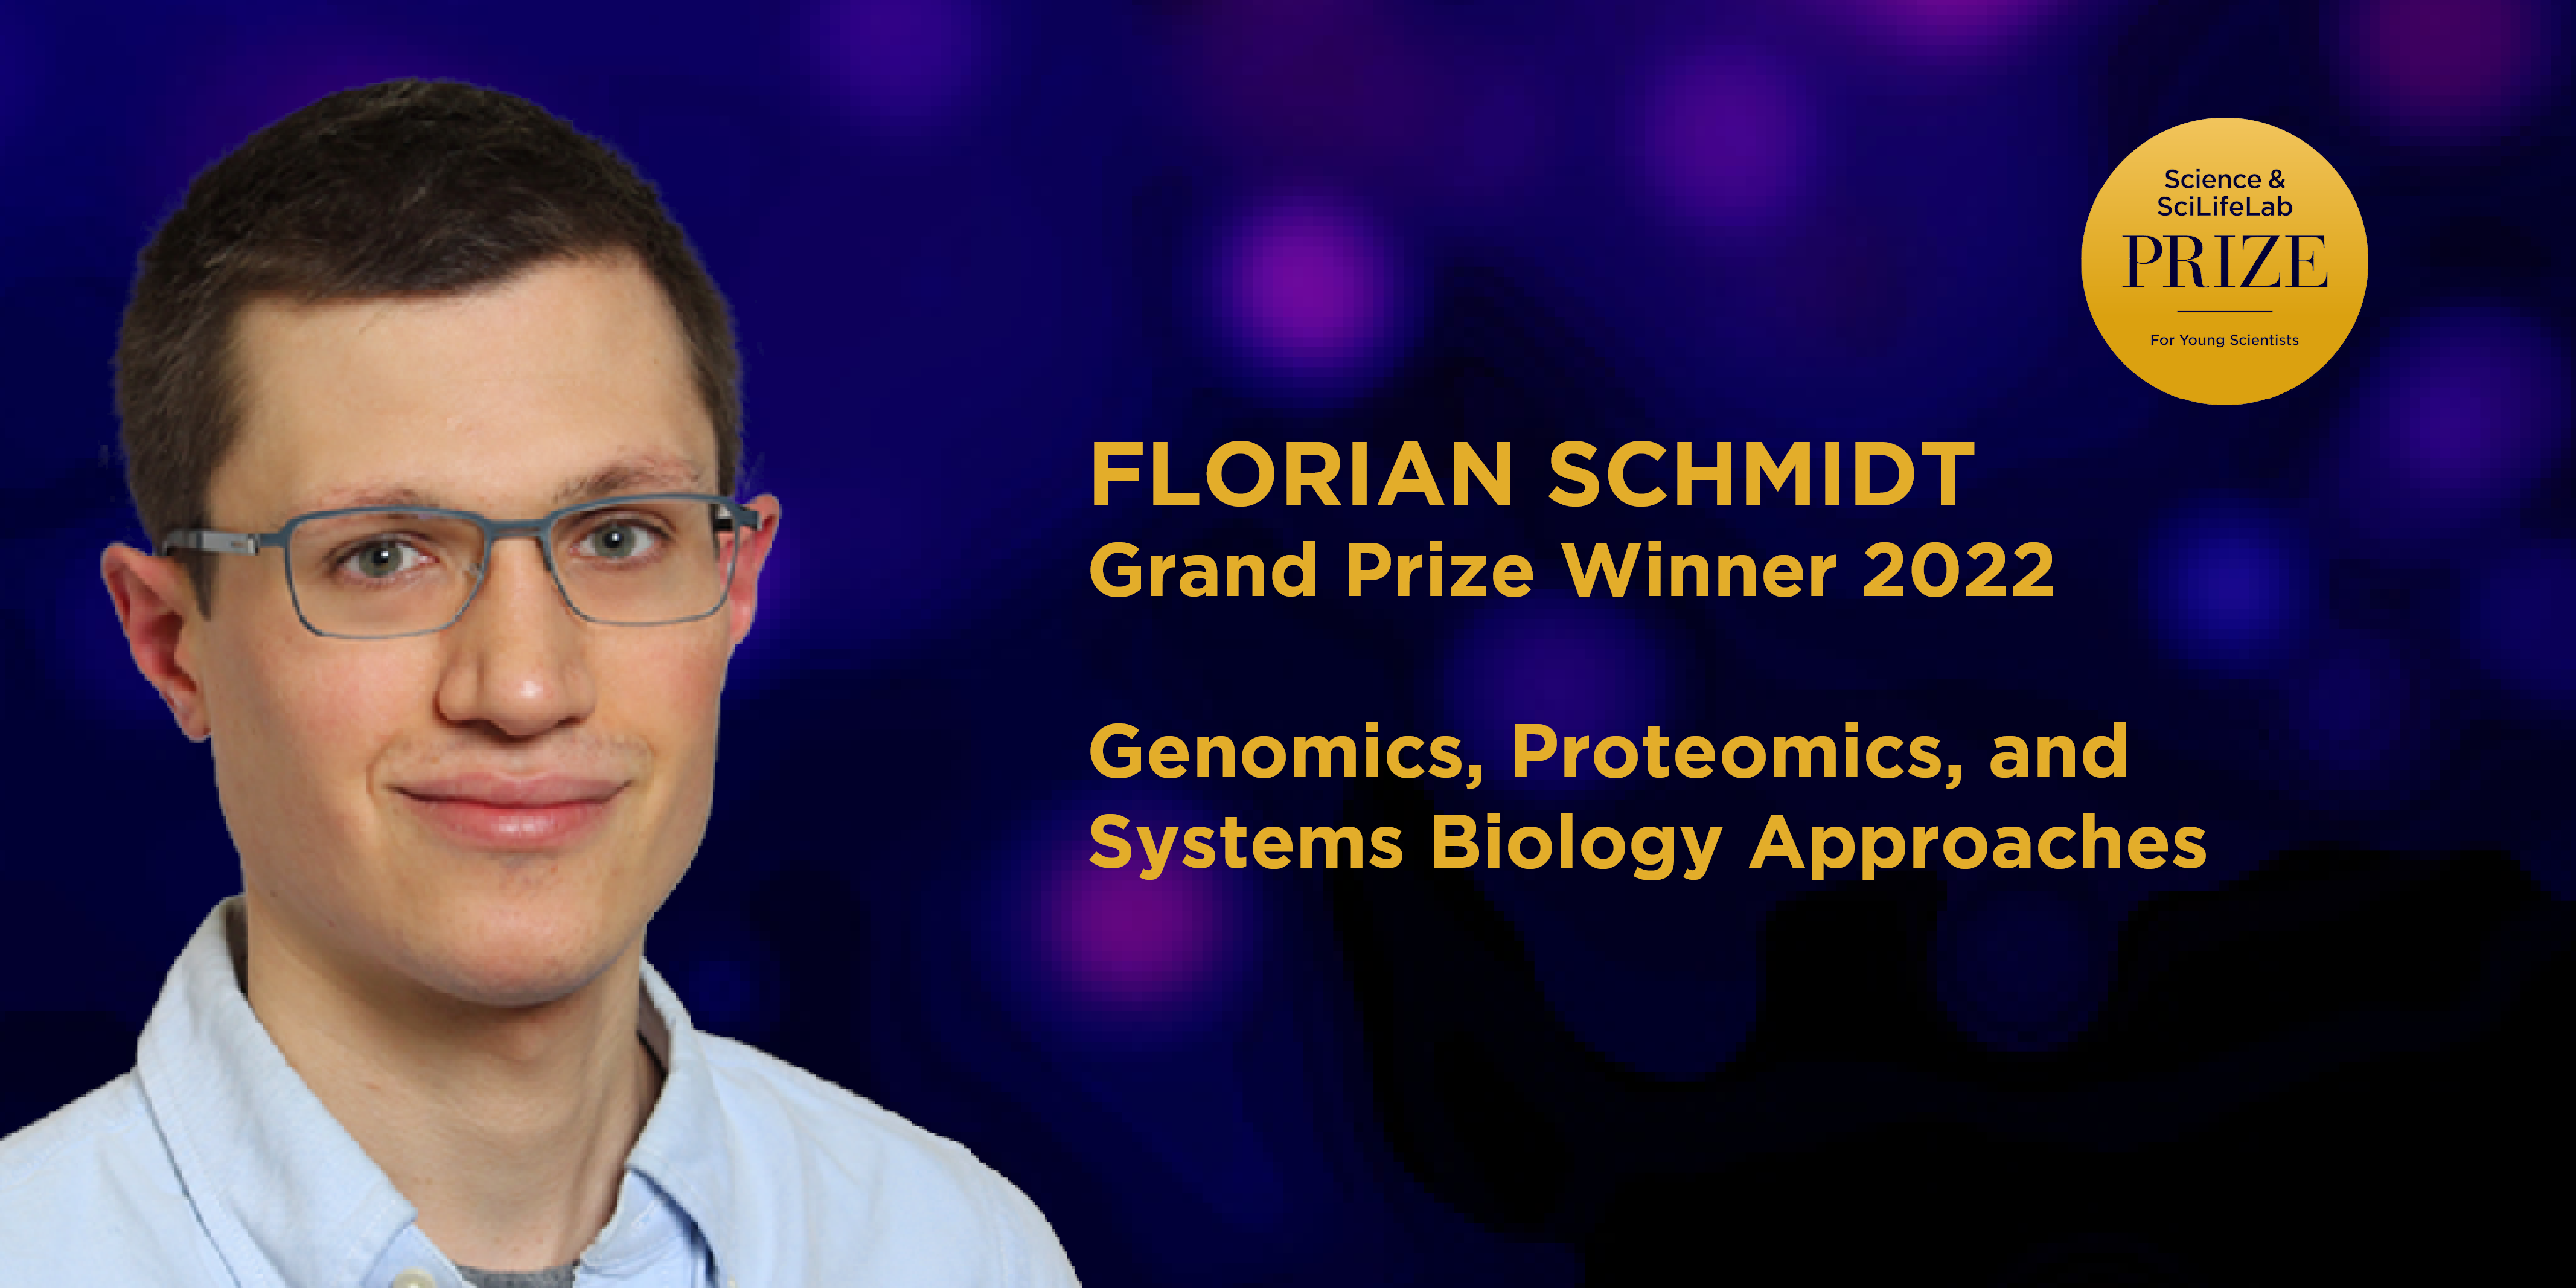 Florian Schmidt, grand prize winner of the scilifelab and science prize for young scientist 2022